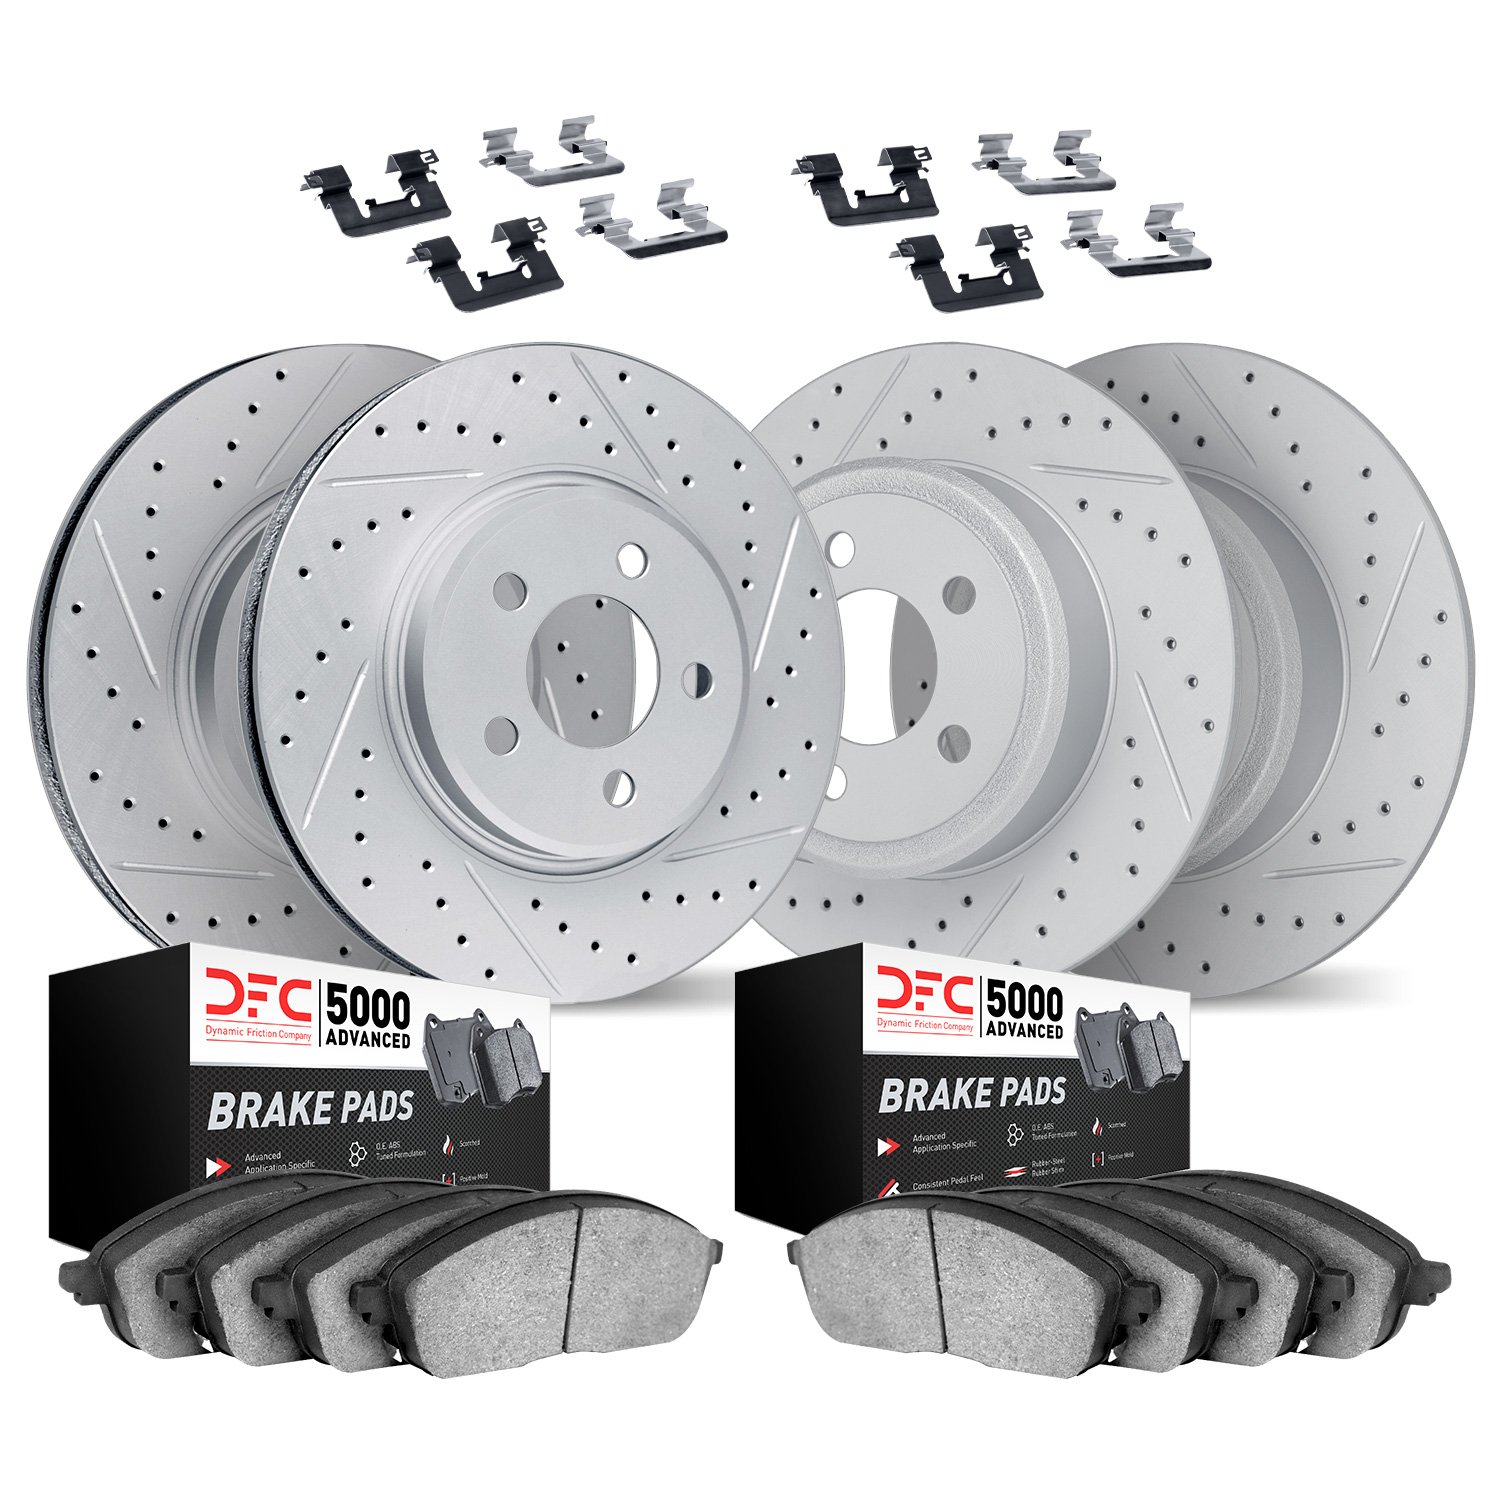 2514-47299 Geoperformance Drilled/Slotted Rotors w/5000 Advanced Brake Pads Kit & Hardware, Fits Select GM, Position: Front and